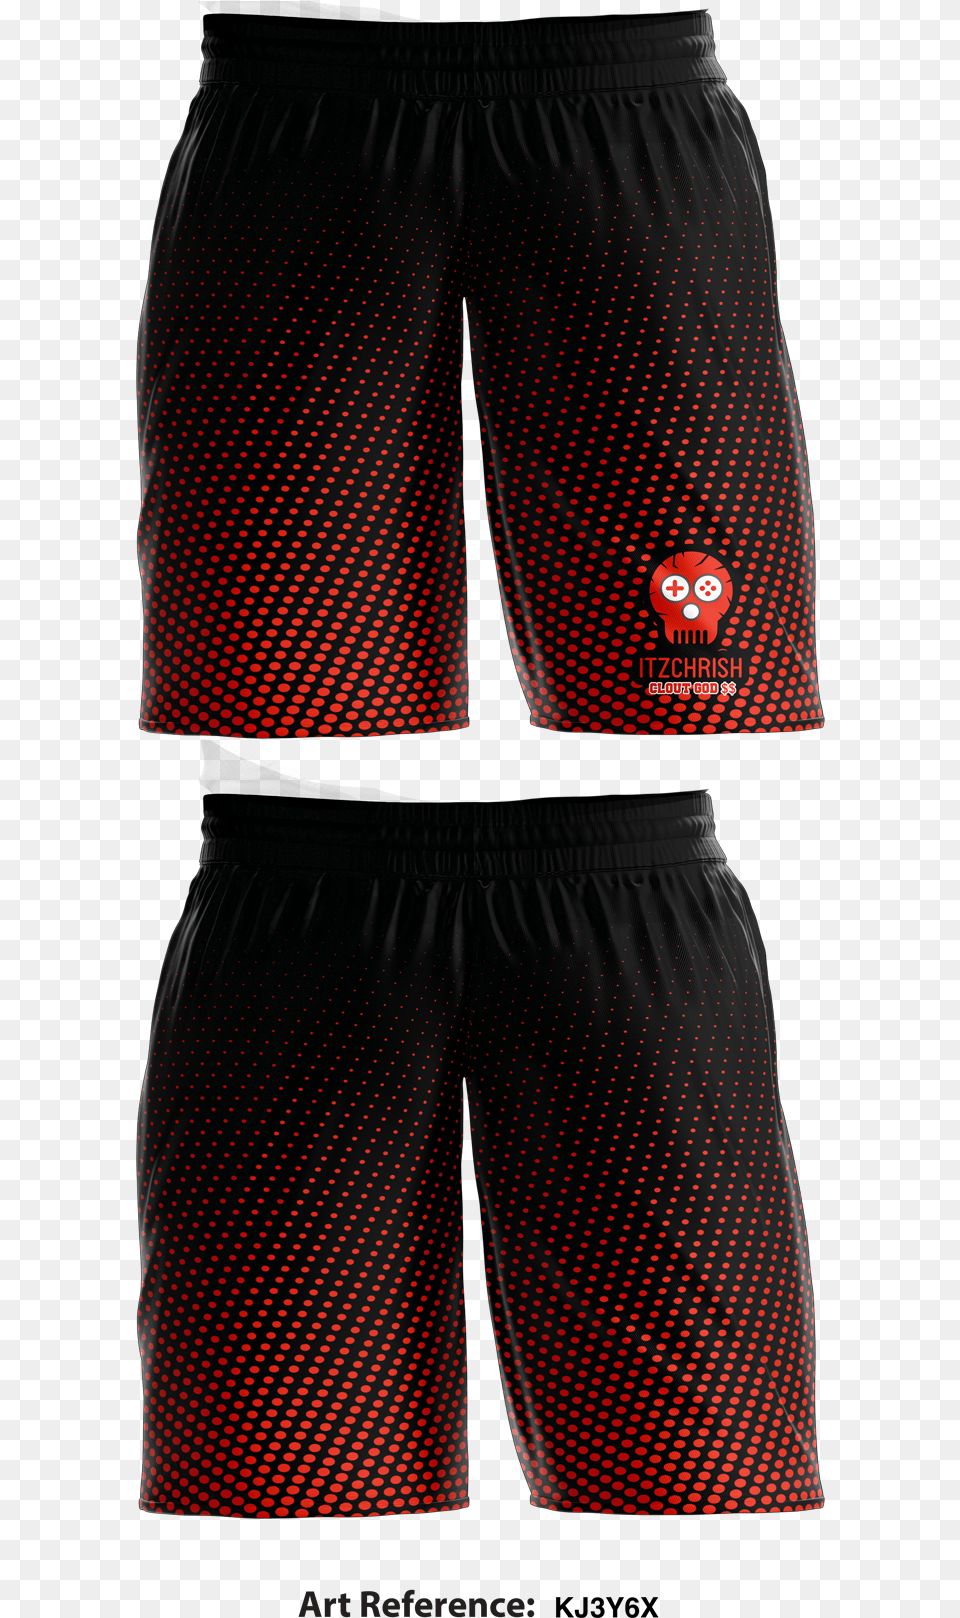 Clout God Athletic Shorts Board Short, Clothing, Skirt, Person, Swimming Trunks Png